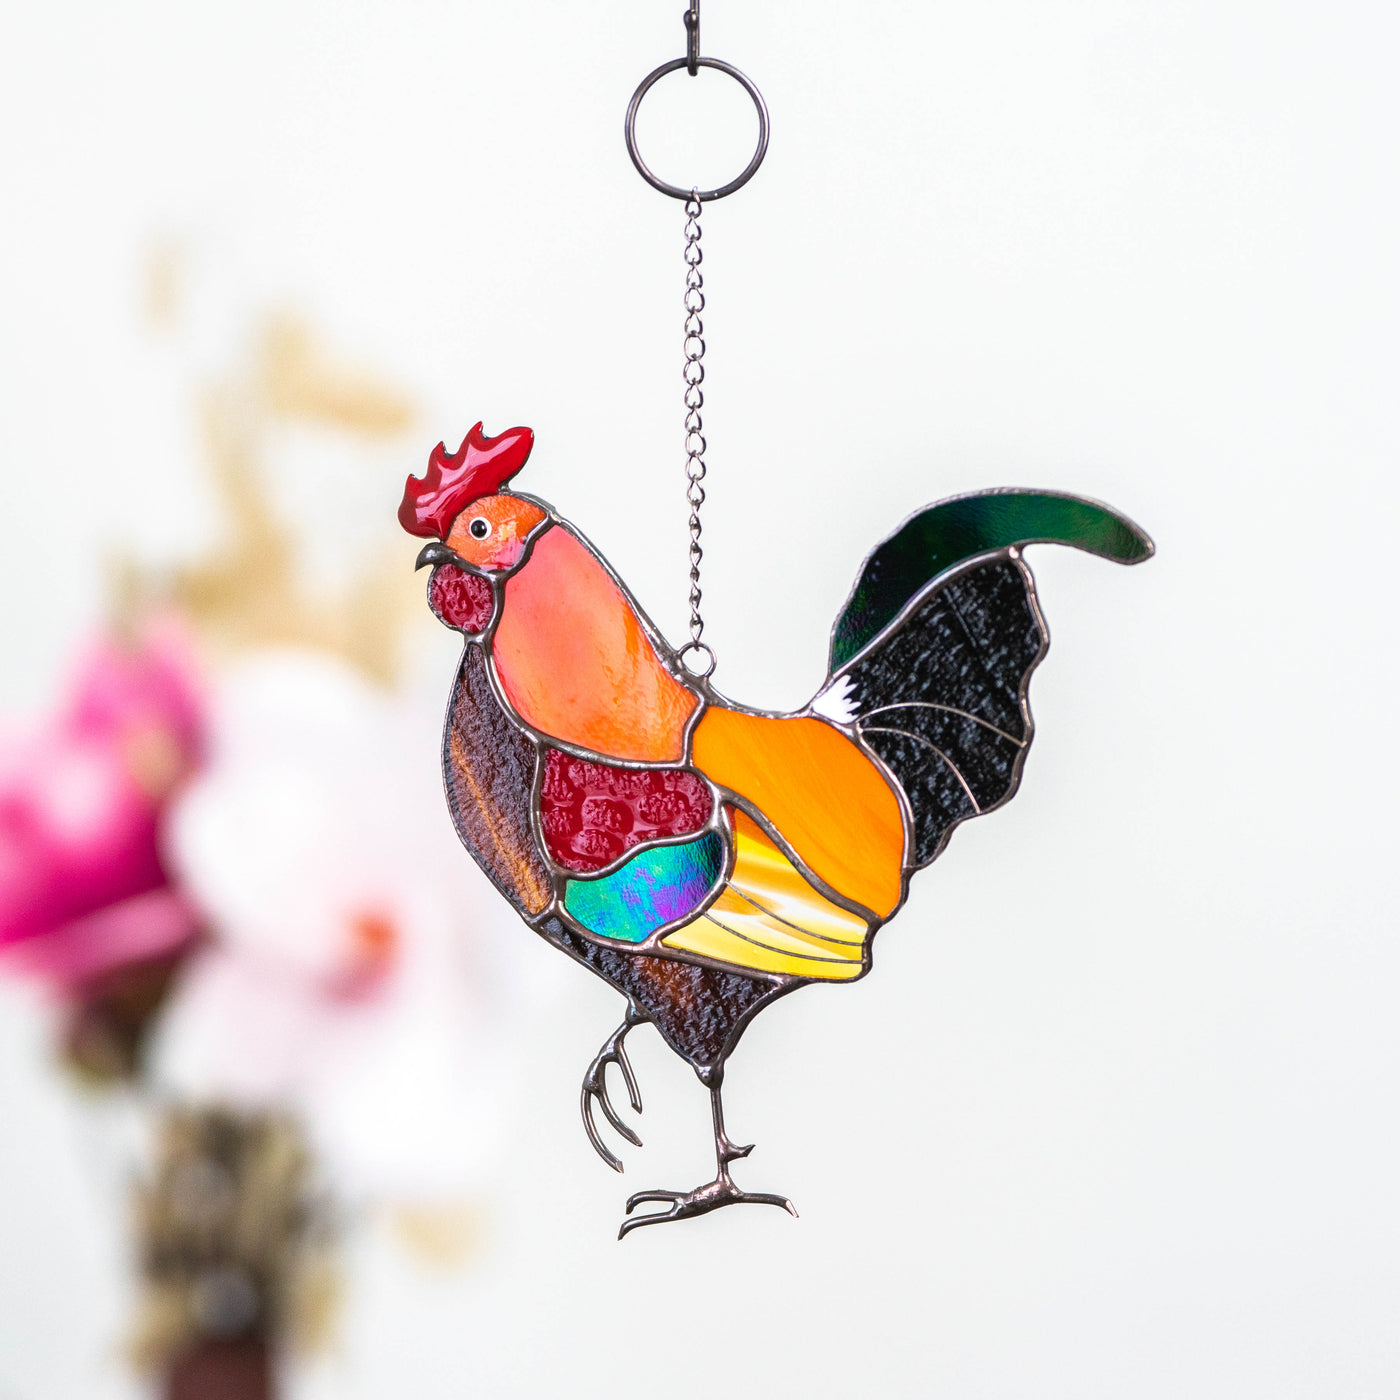 Colorful stained glass suncatcher of a rooster